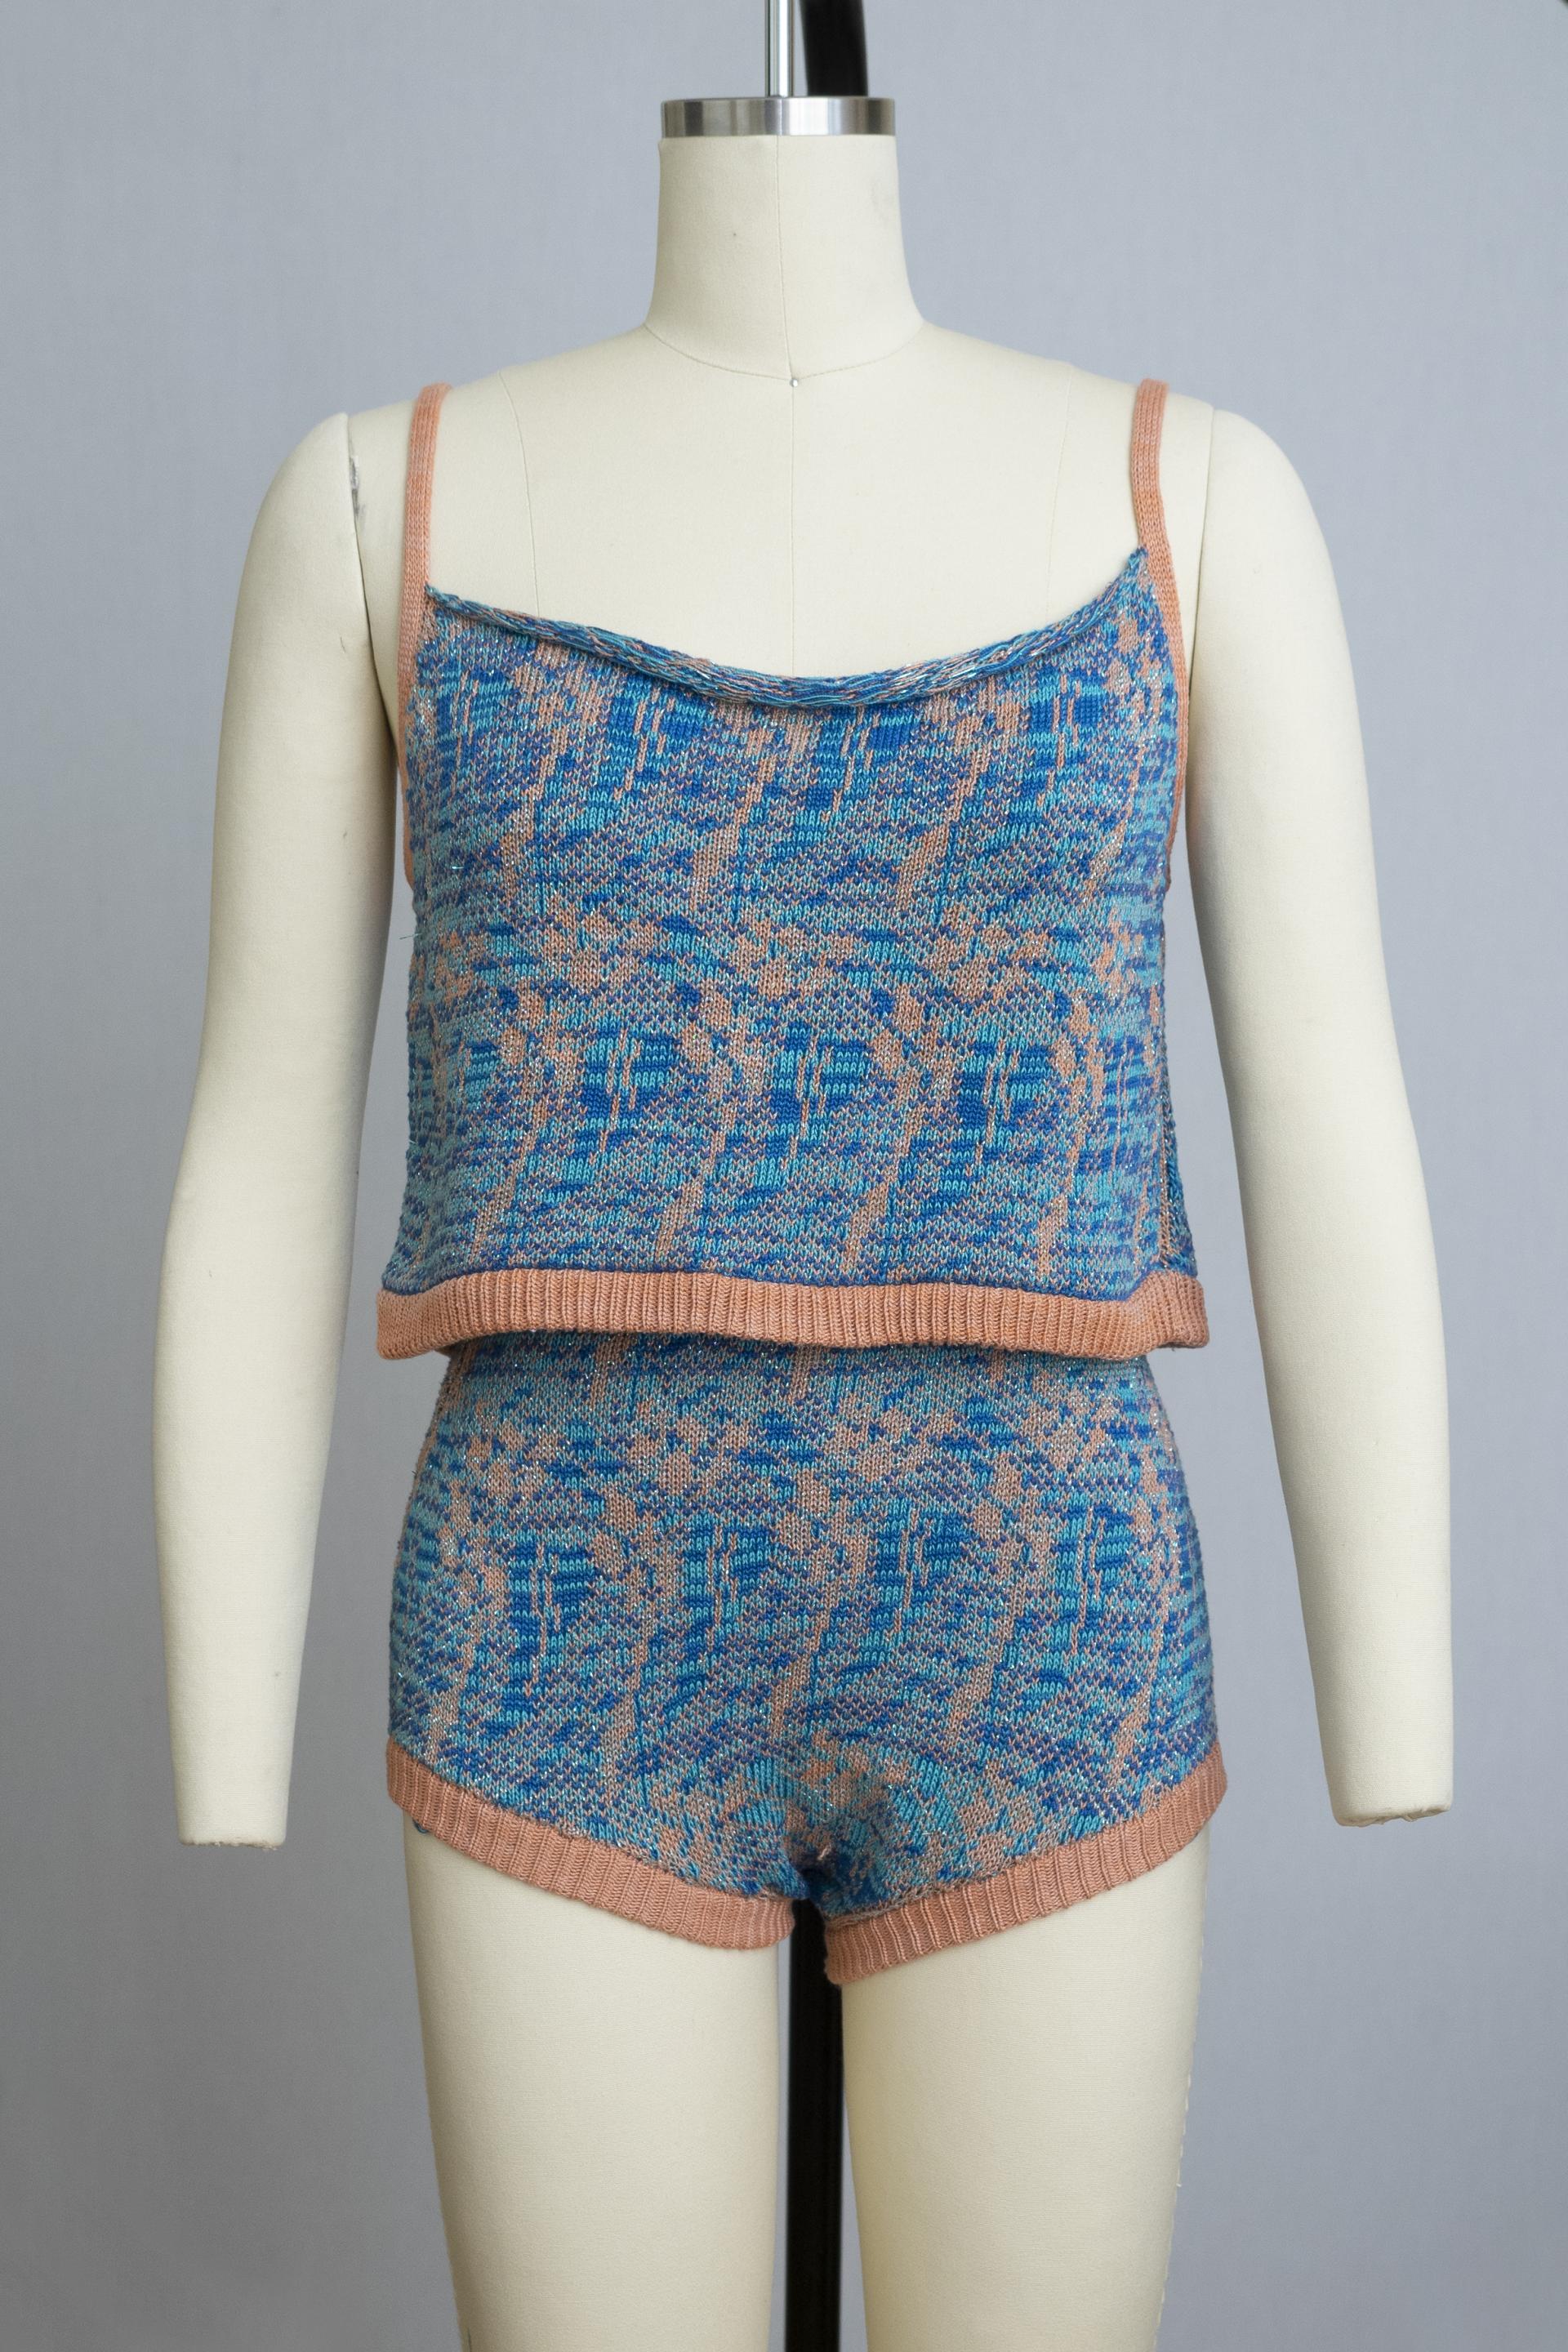 dress form wearing a knit playsuit in blues and pink